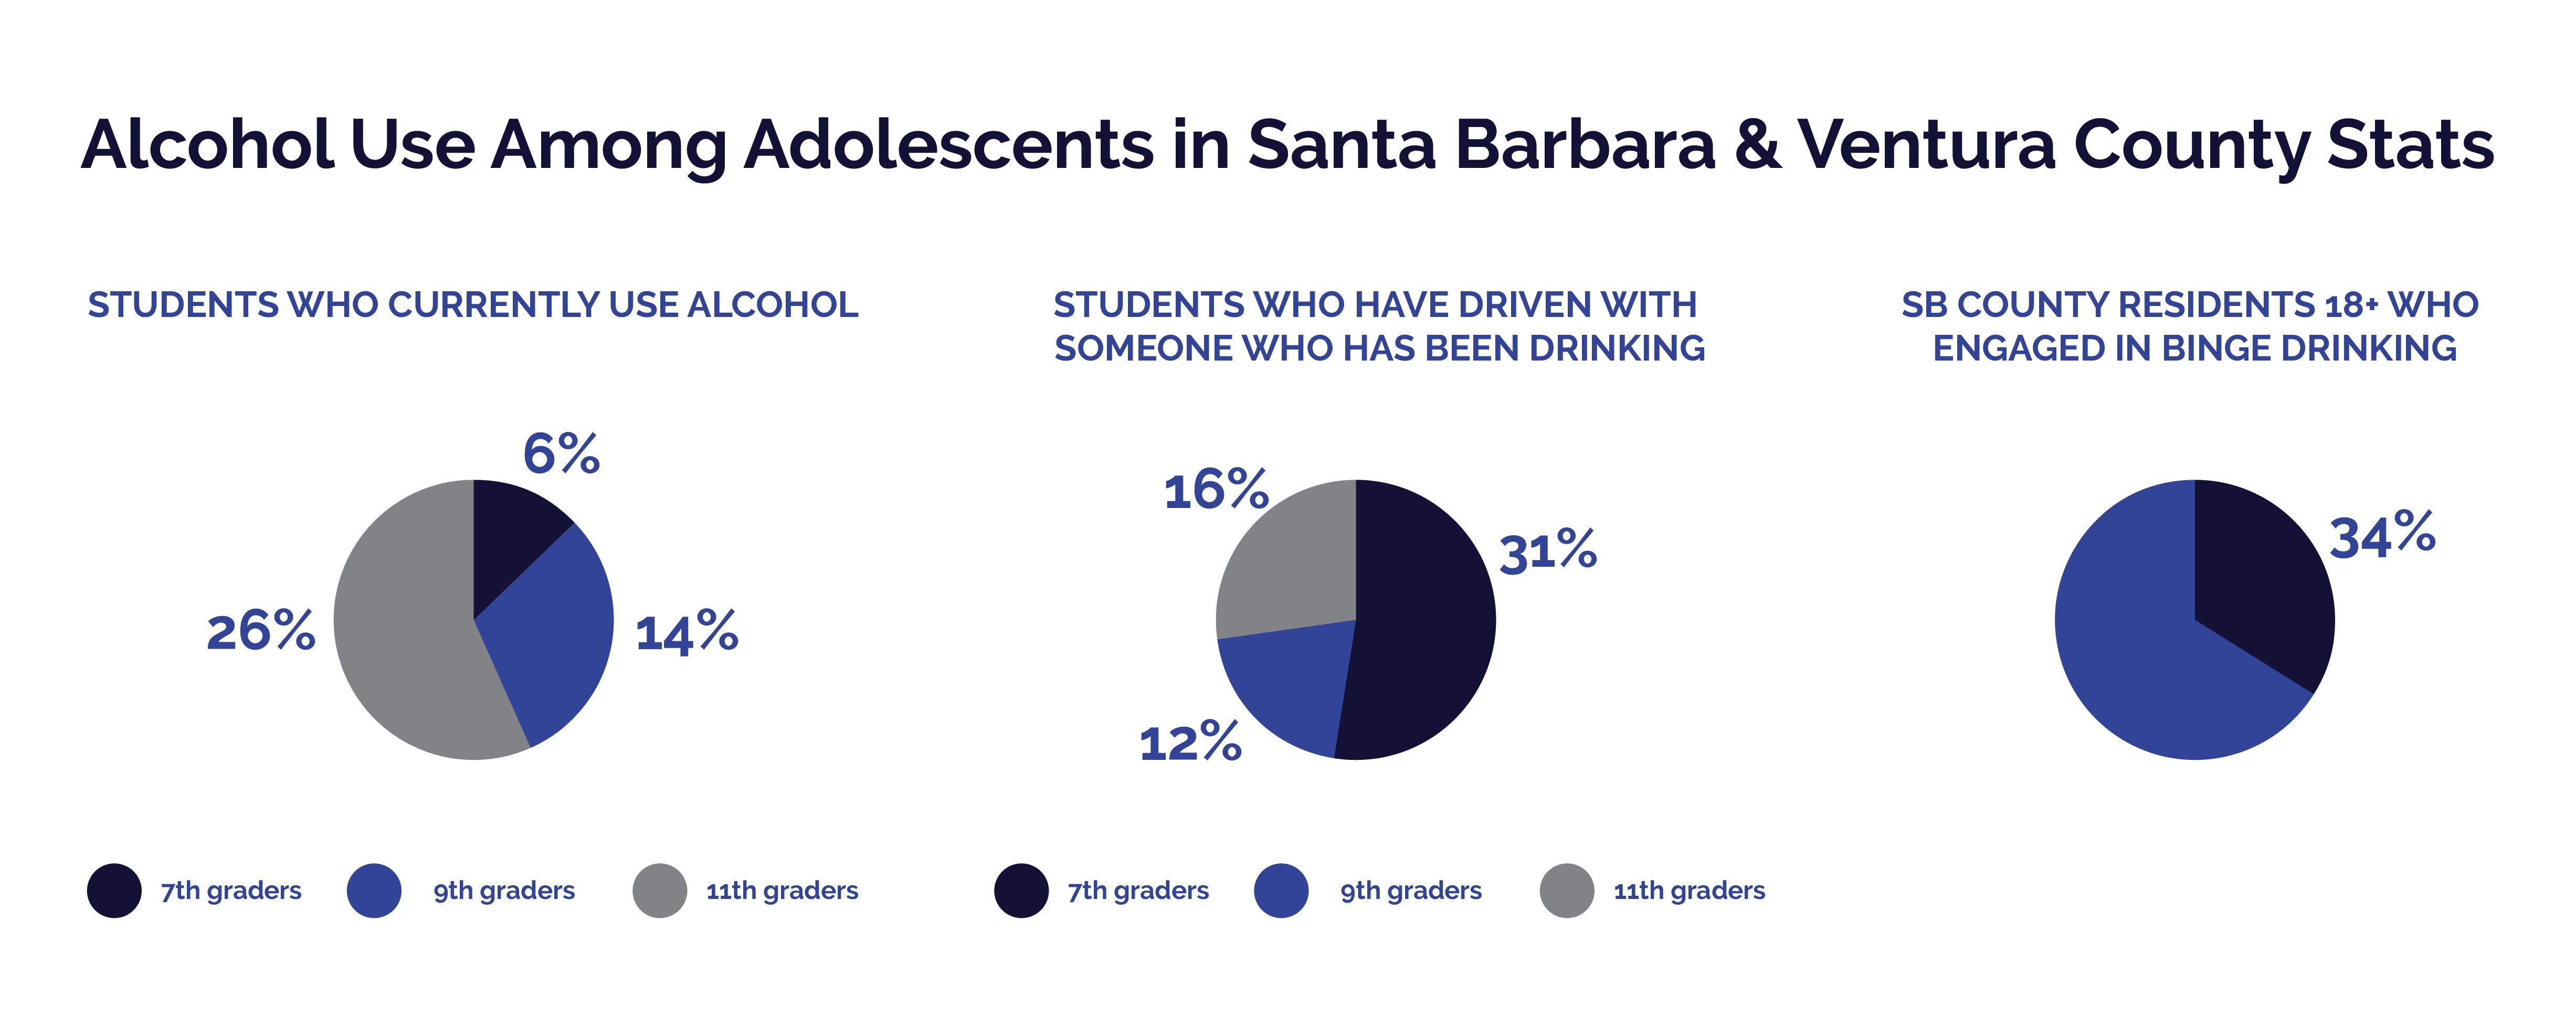 A Guide to Adolescent Substance Use Disorder in Santa Barbara County - Alcohol Use